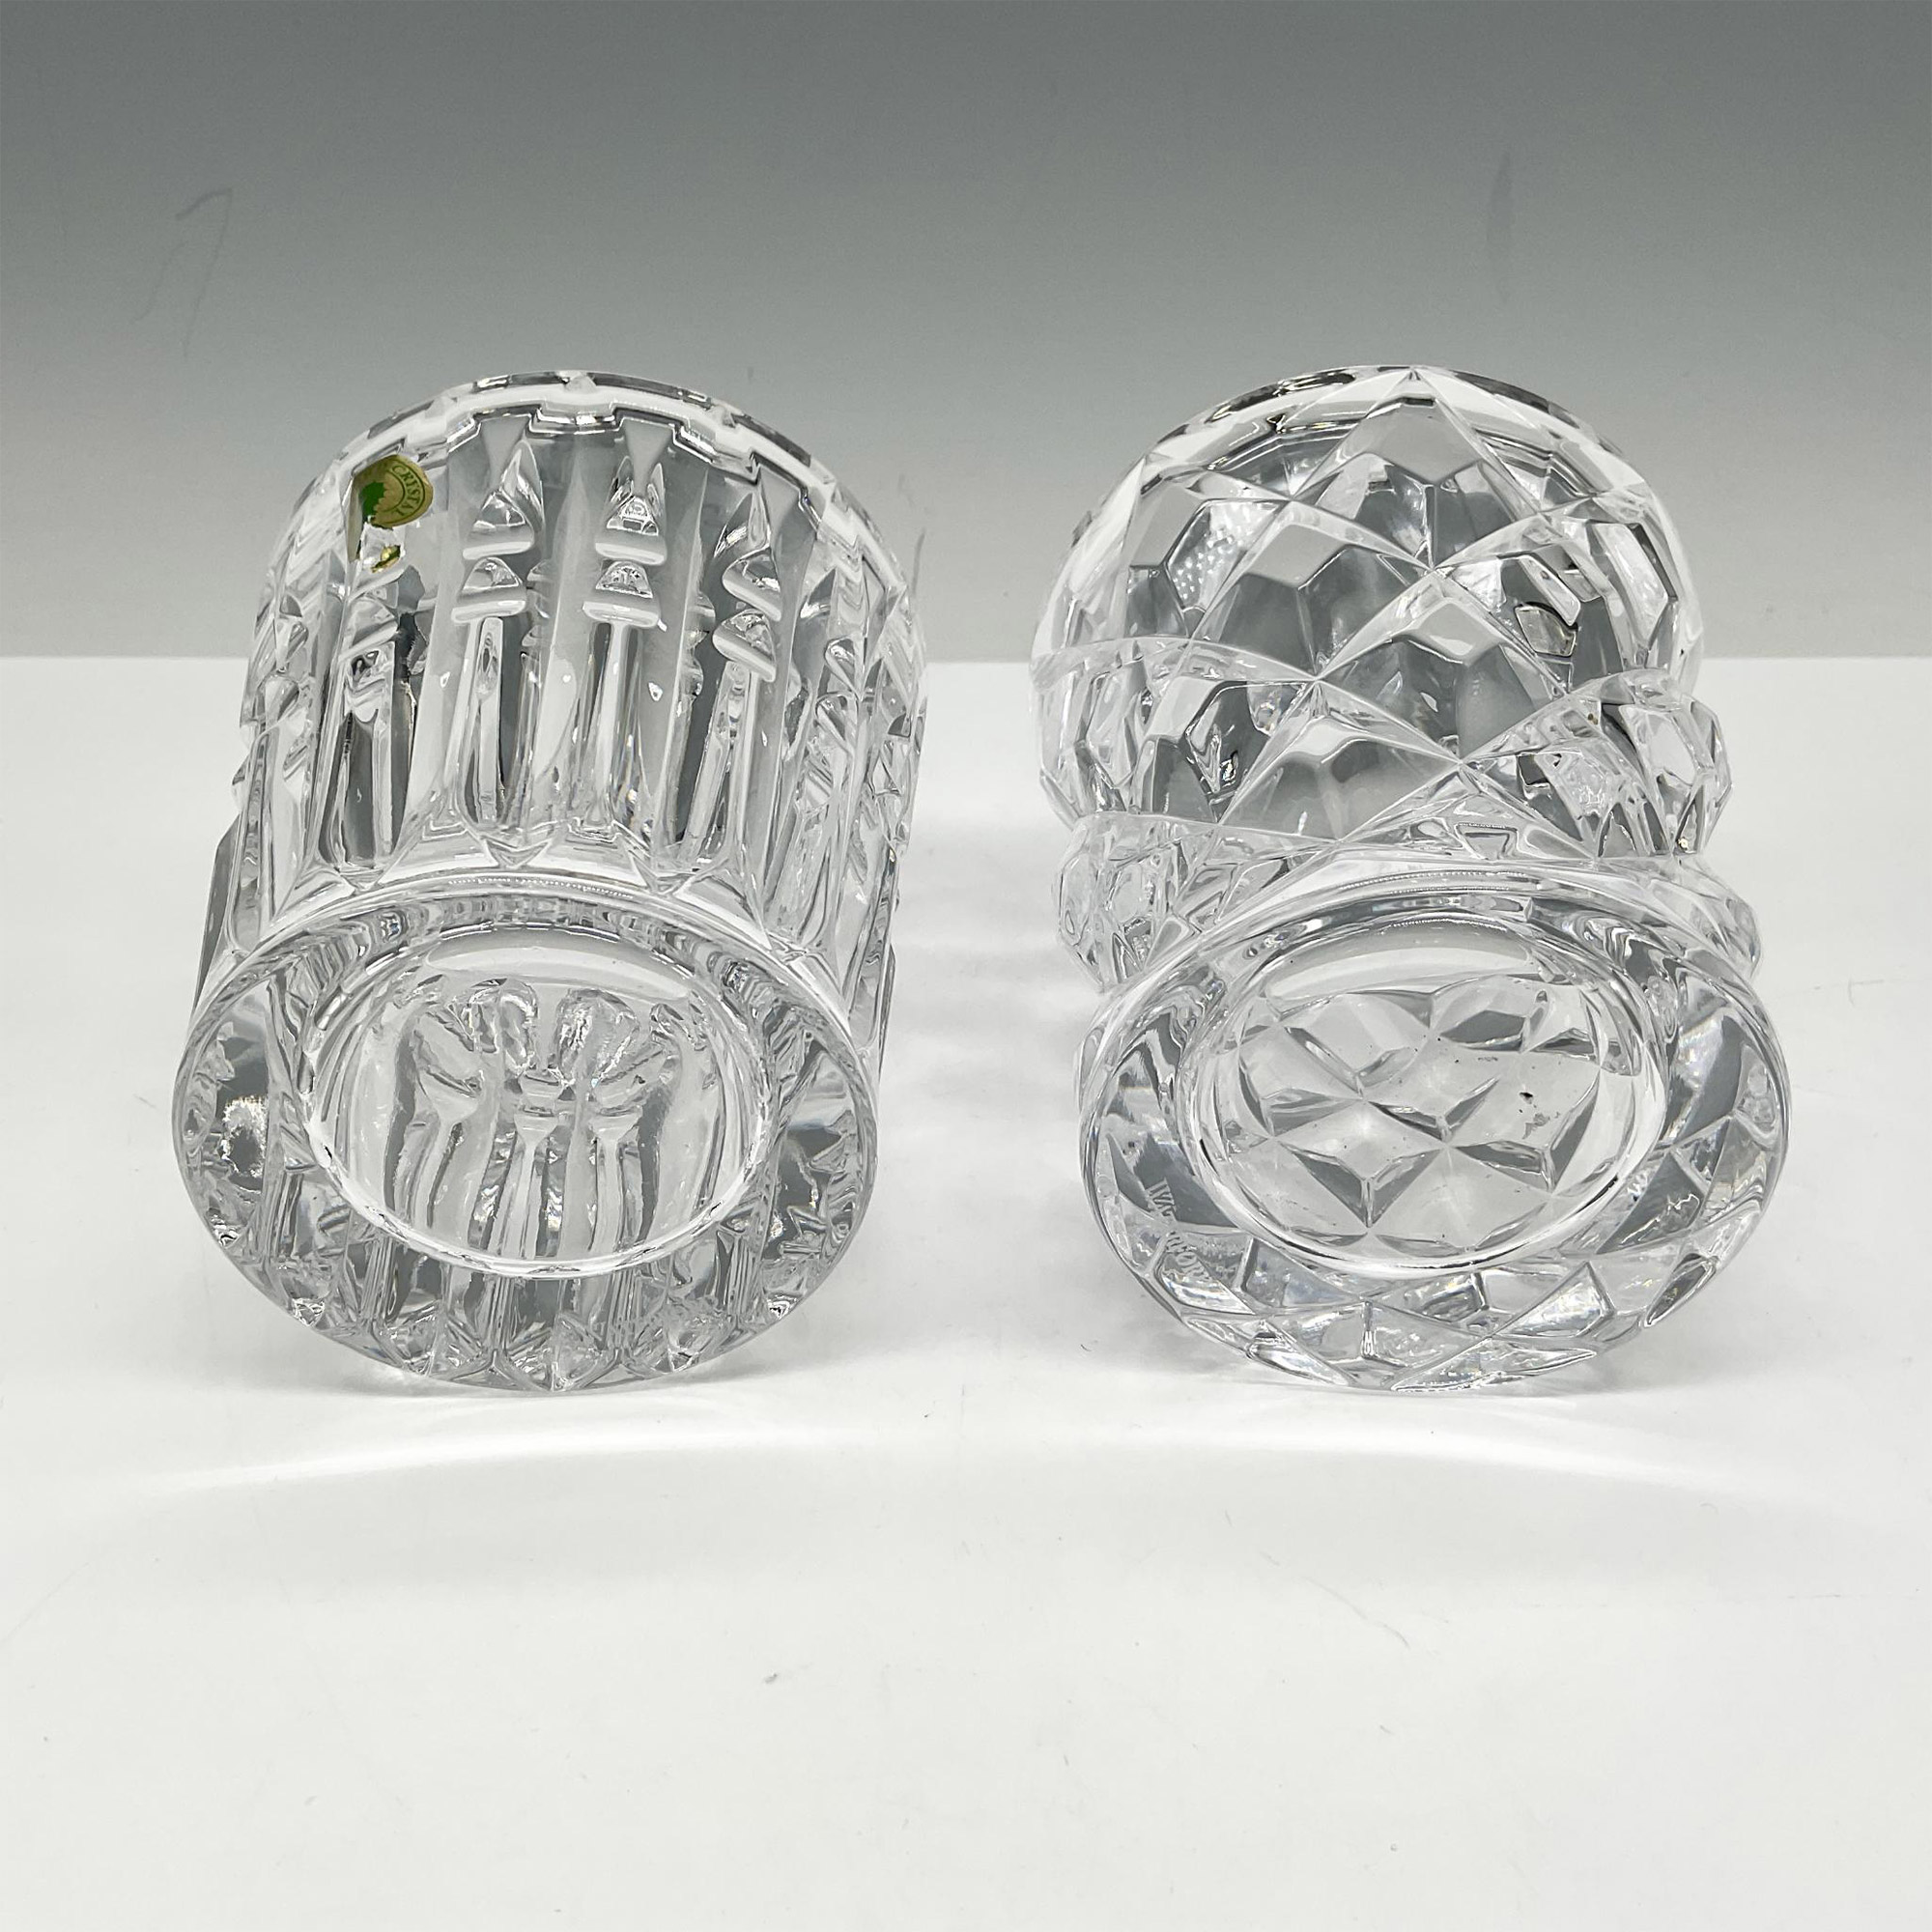 2pc Waterford Cut Crystal Tumblers - Image 3 of 3